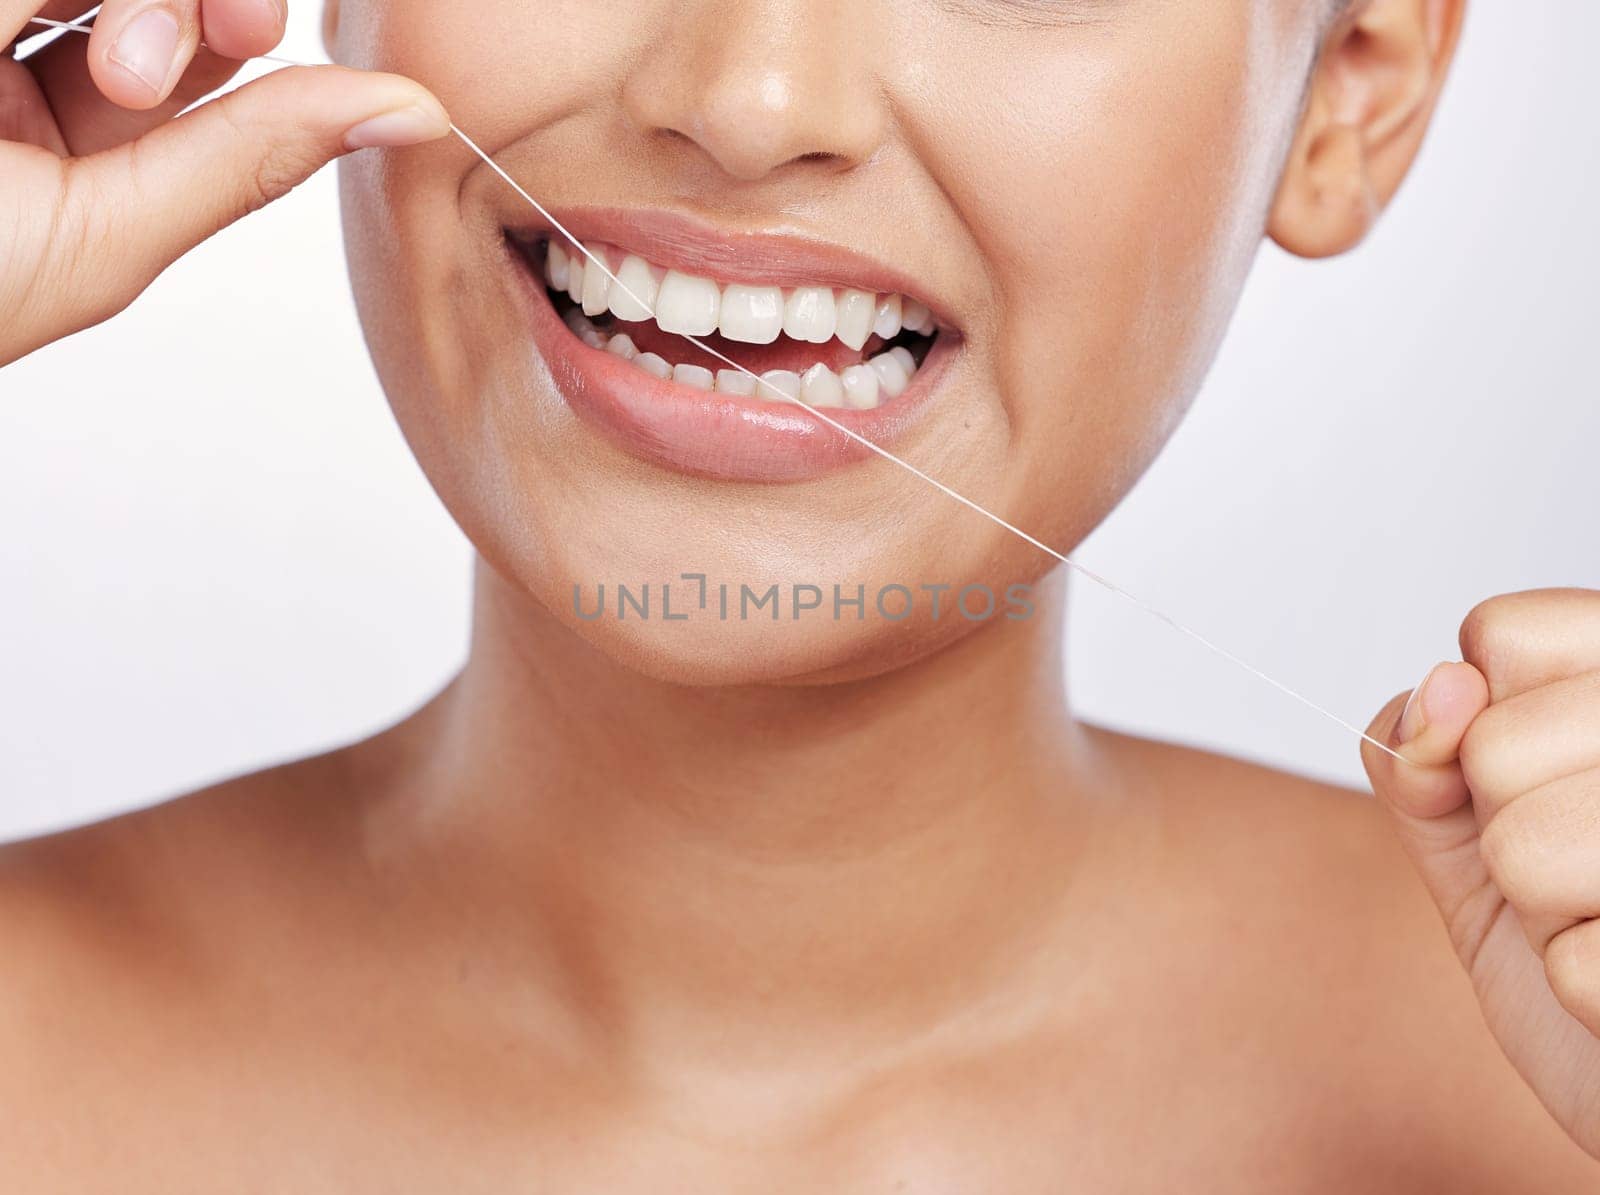 Mouth, face and woman floss teeth for dental health, care or gingivitis on studio background. Closeup of female model, oral thread and cleaning string for fresh breath, tooth hygiene or healthy habit.